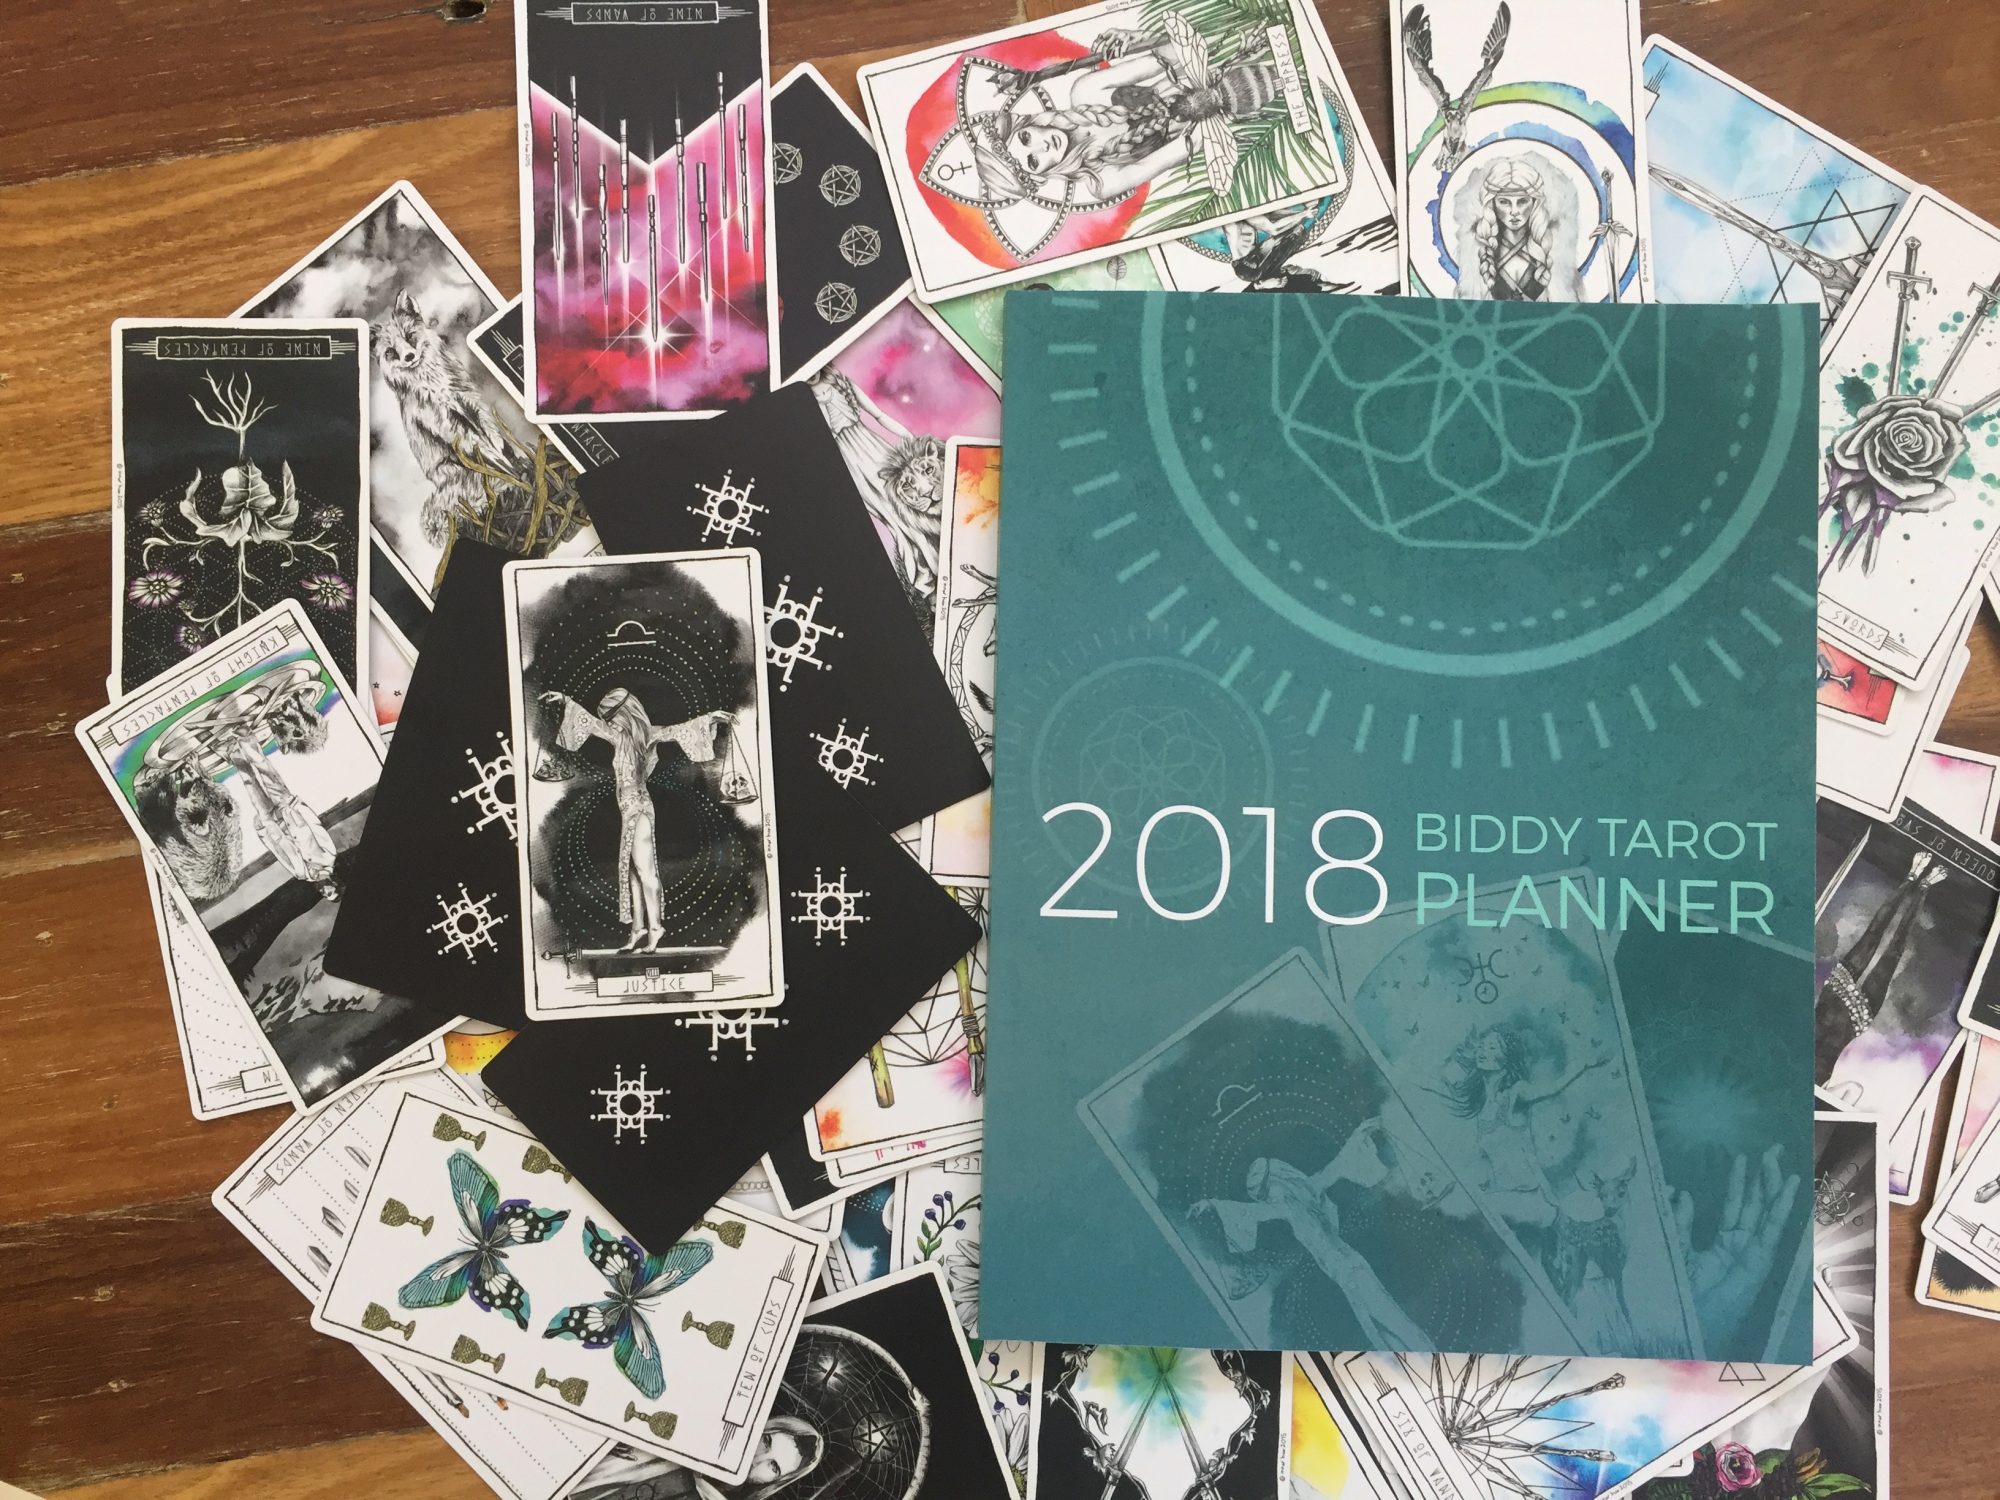 The Biddy Tarot Planner will help with your 2018 daily spiritual  practiceHelloGiggles